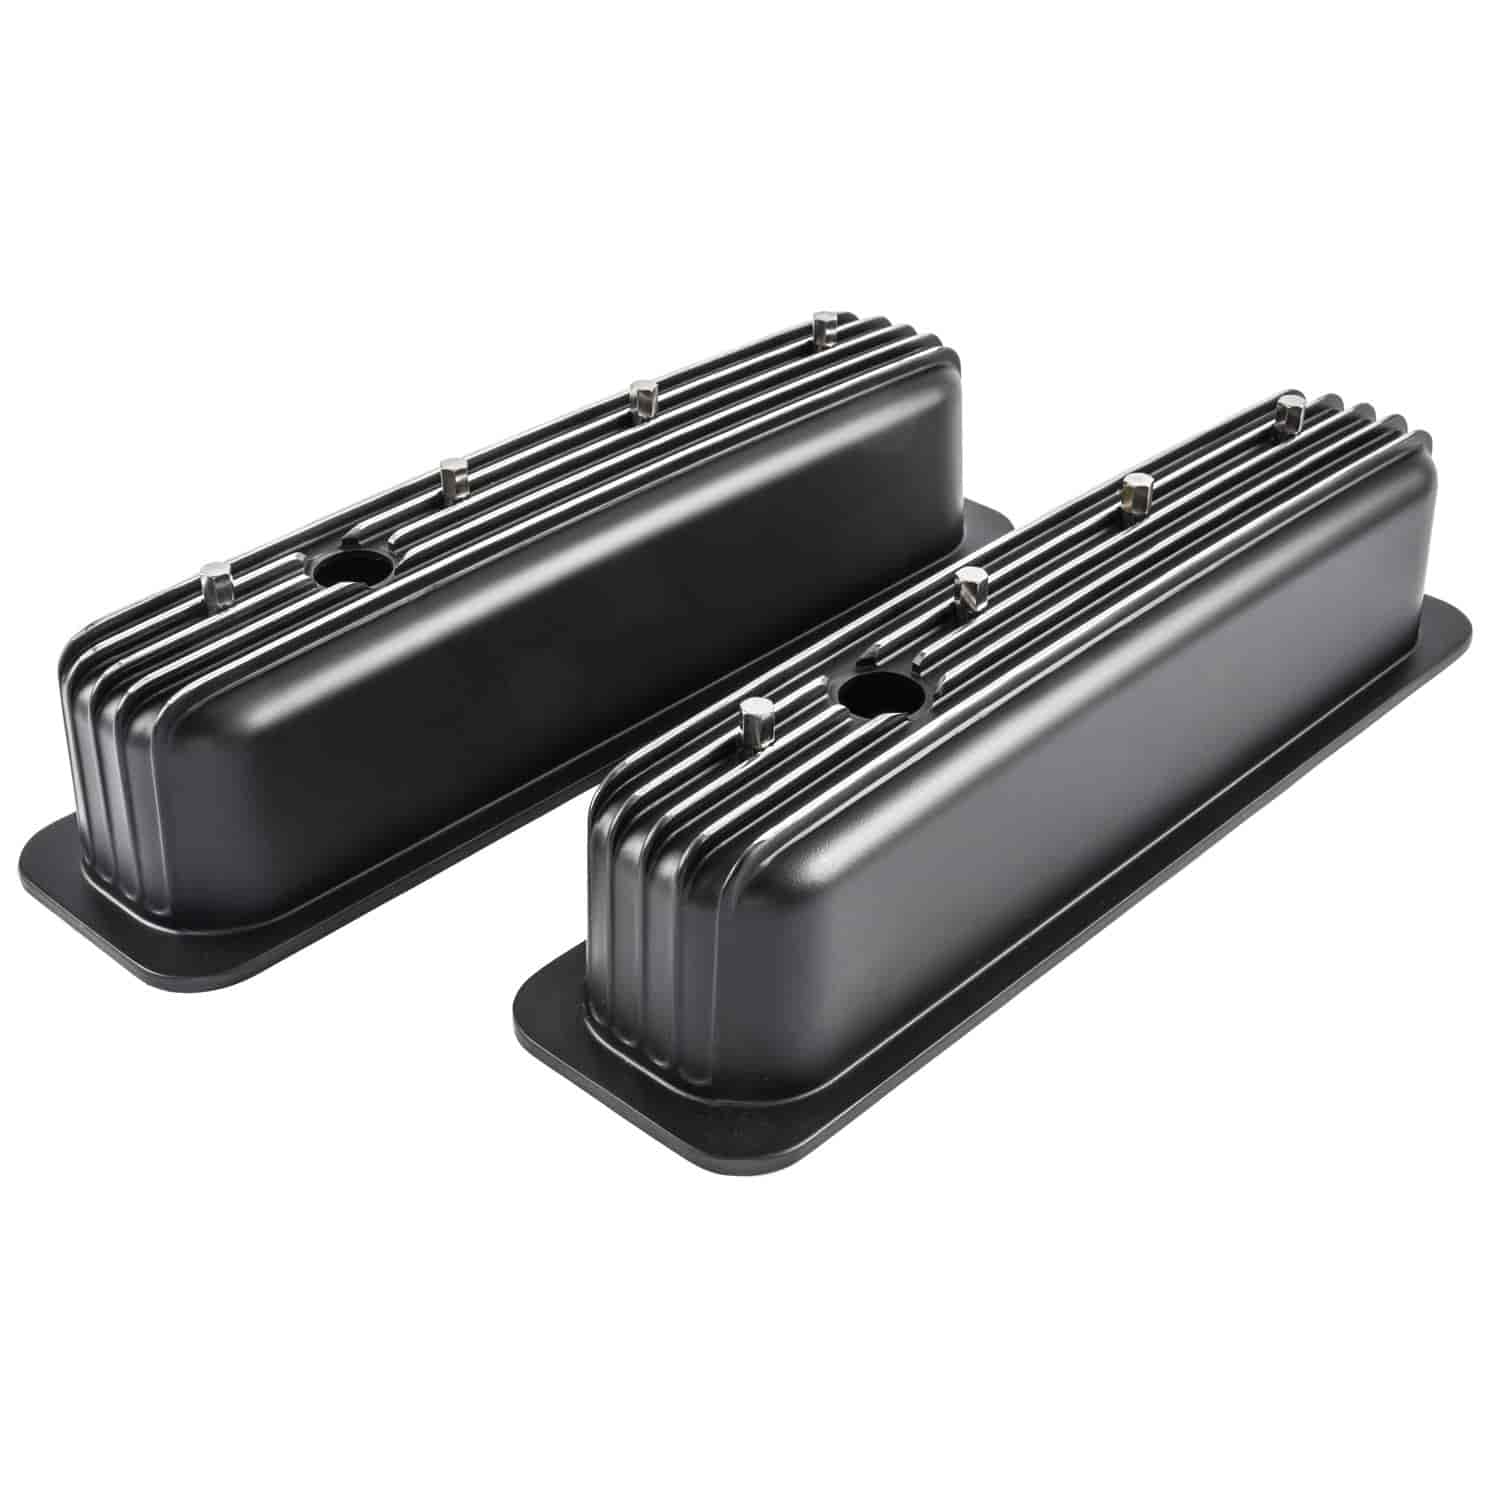 Black Finned Valve Covers for 1987-1997 Small Block Chevy